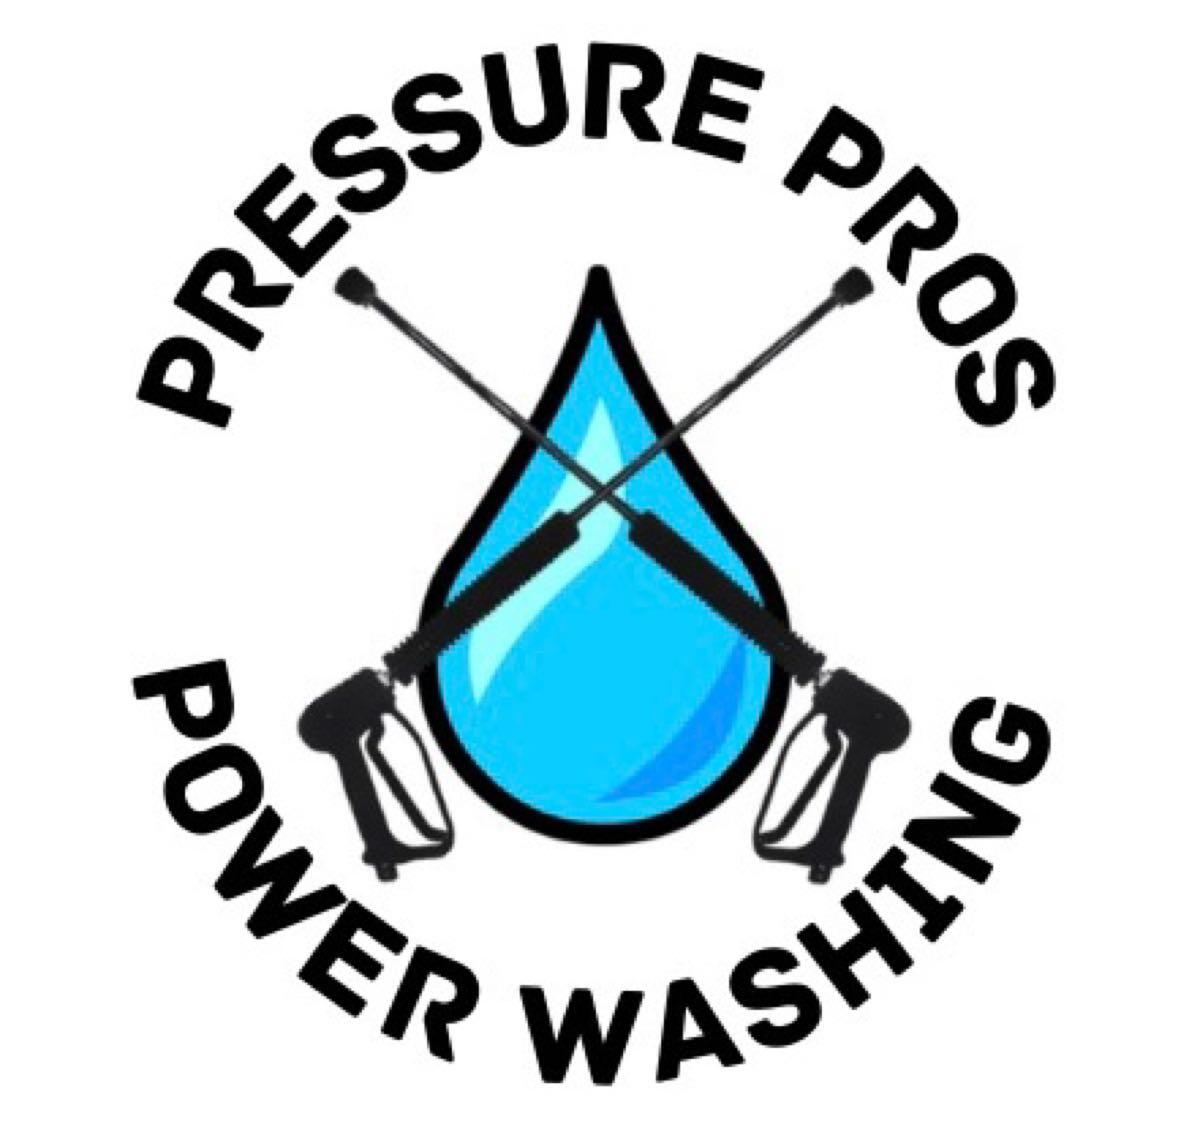 logo for pressure washing business